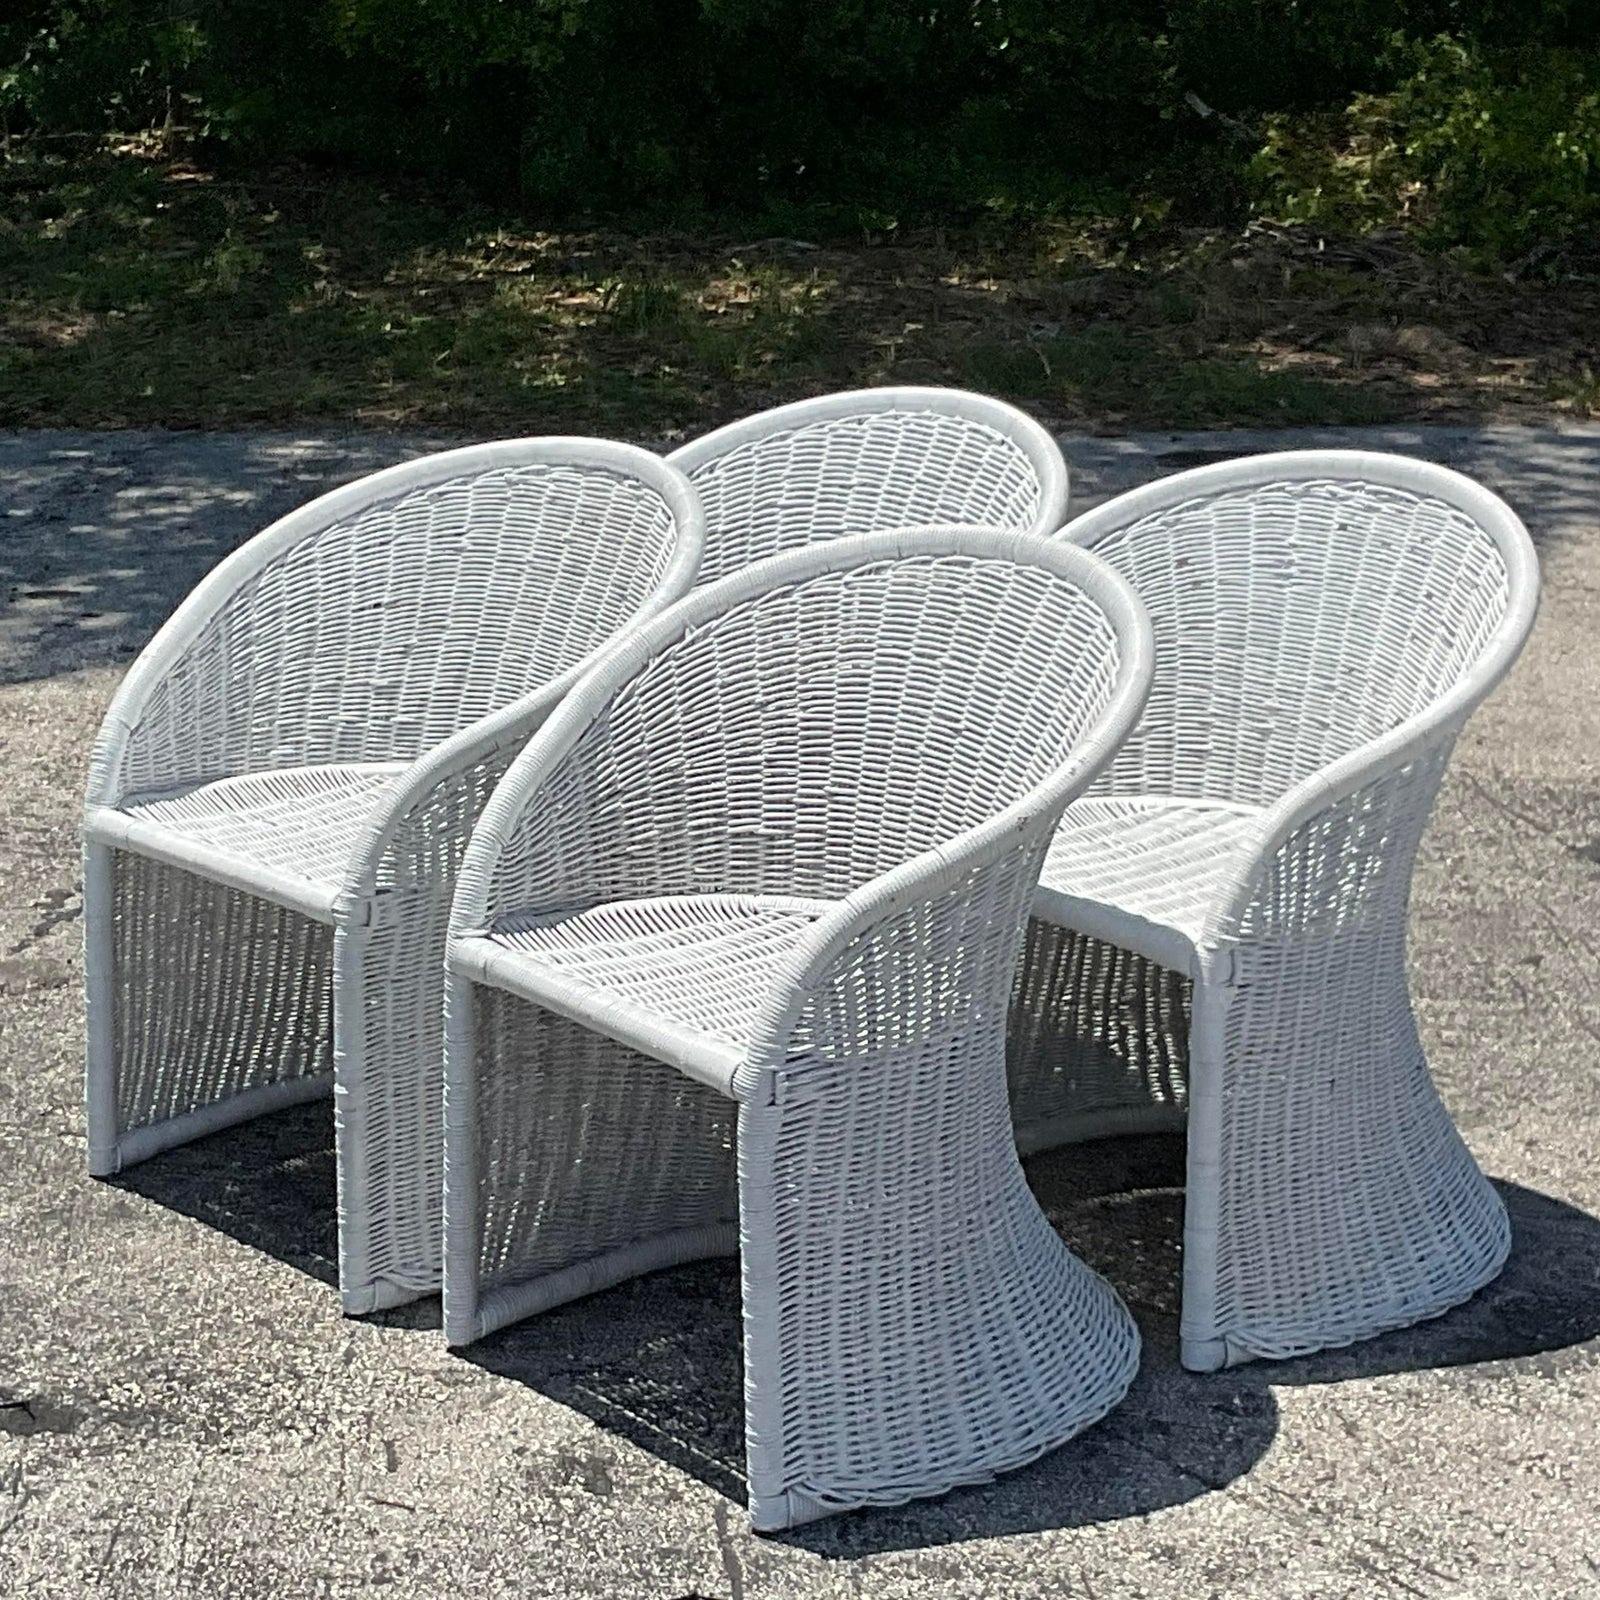 Late 20th Century Vintage Coastal Woven Rattan Dining Table Set of 4 In Good Condition For Sale In west palm beach, FL